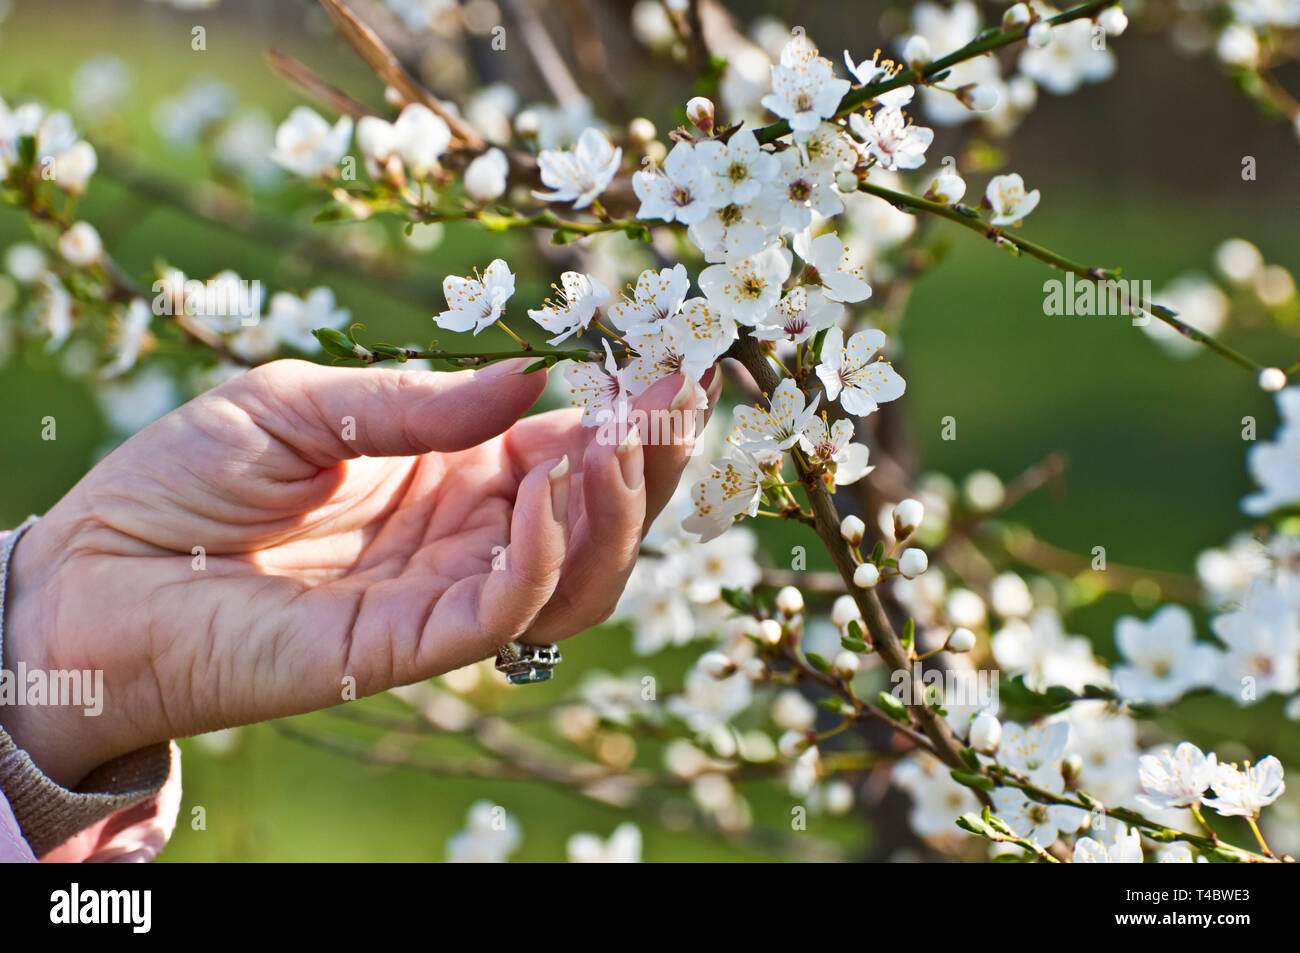 woman hand touching an apple tree flowers blooming Stock Photo